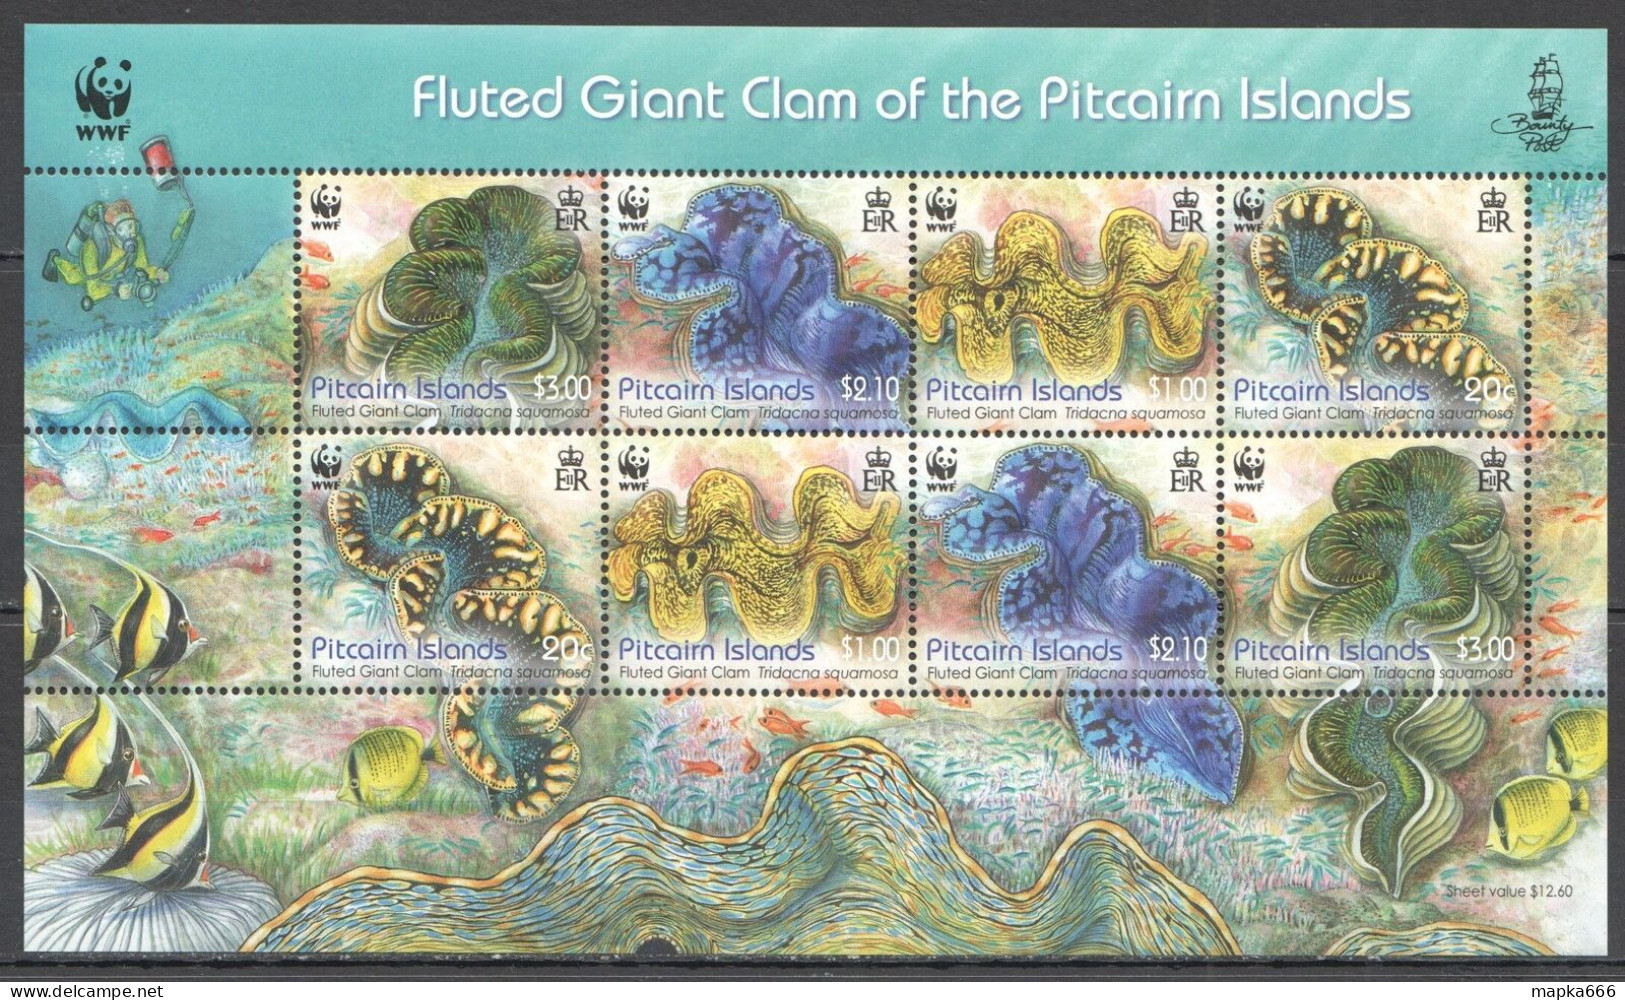 Ft103 2012 Pitcairn Islands Wwf Fluted Giant Clam Michel 25 Euro #865-8 1Kb Mnh - Marine Life